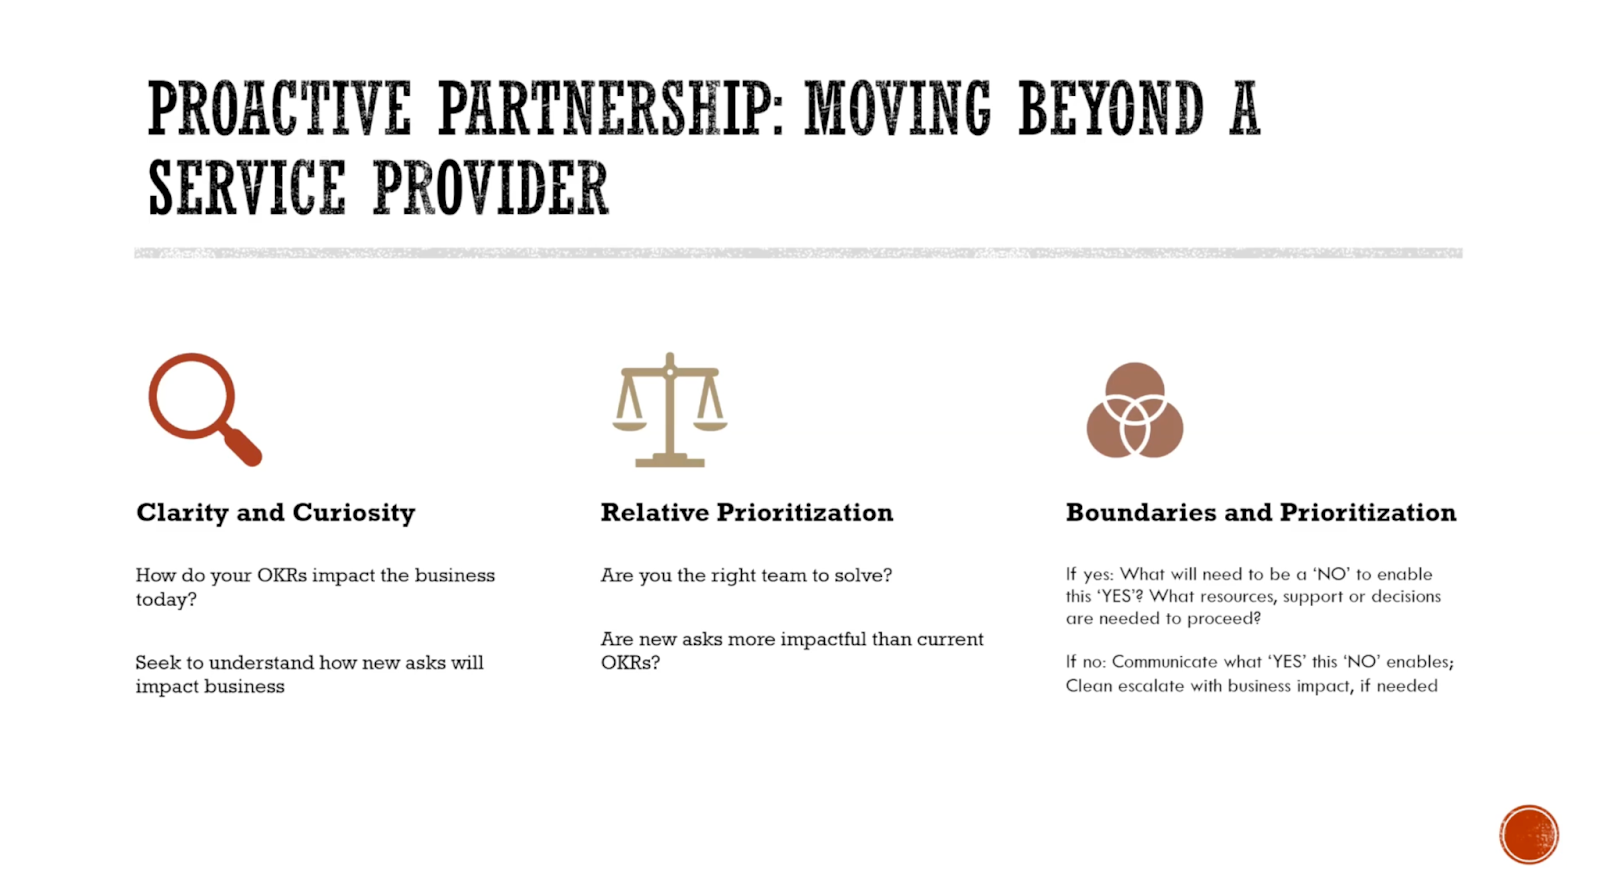 Moving beyond service provision with a proactive partnership: Clarity and curiosity, relative prioritization, boundaries and prioritization.